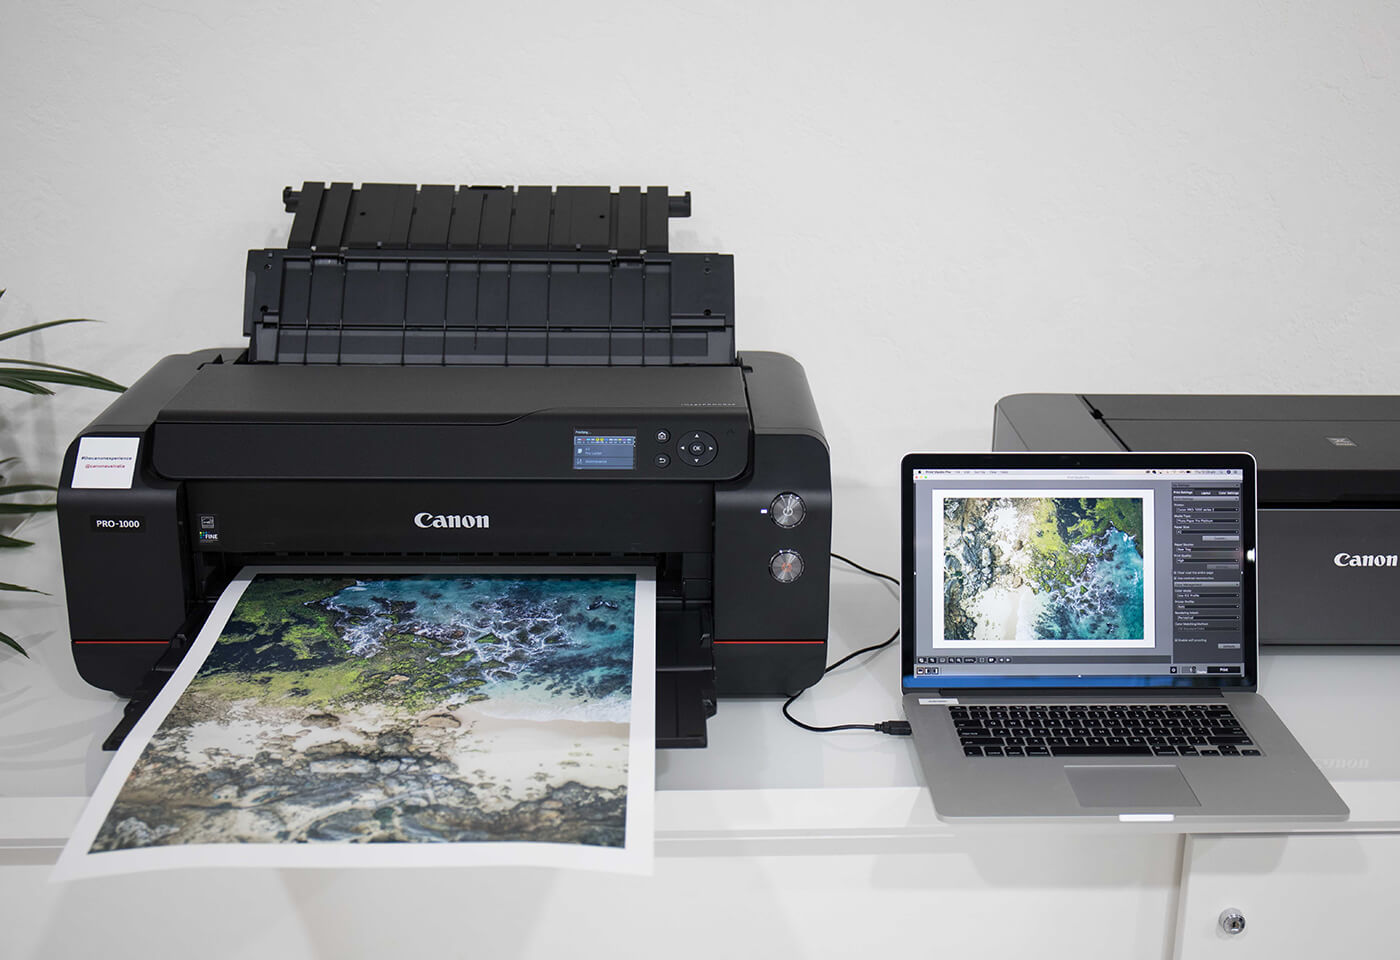 Professional photo printing tips from the experts - Canon Europe